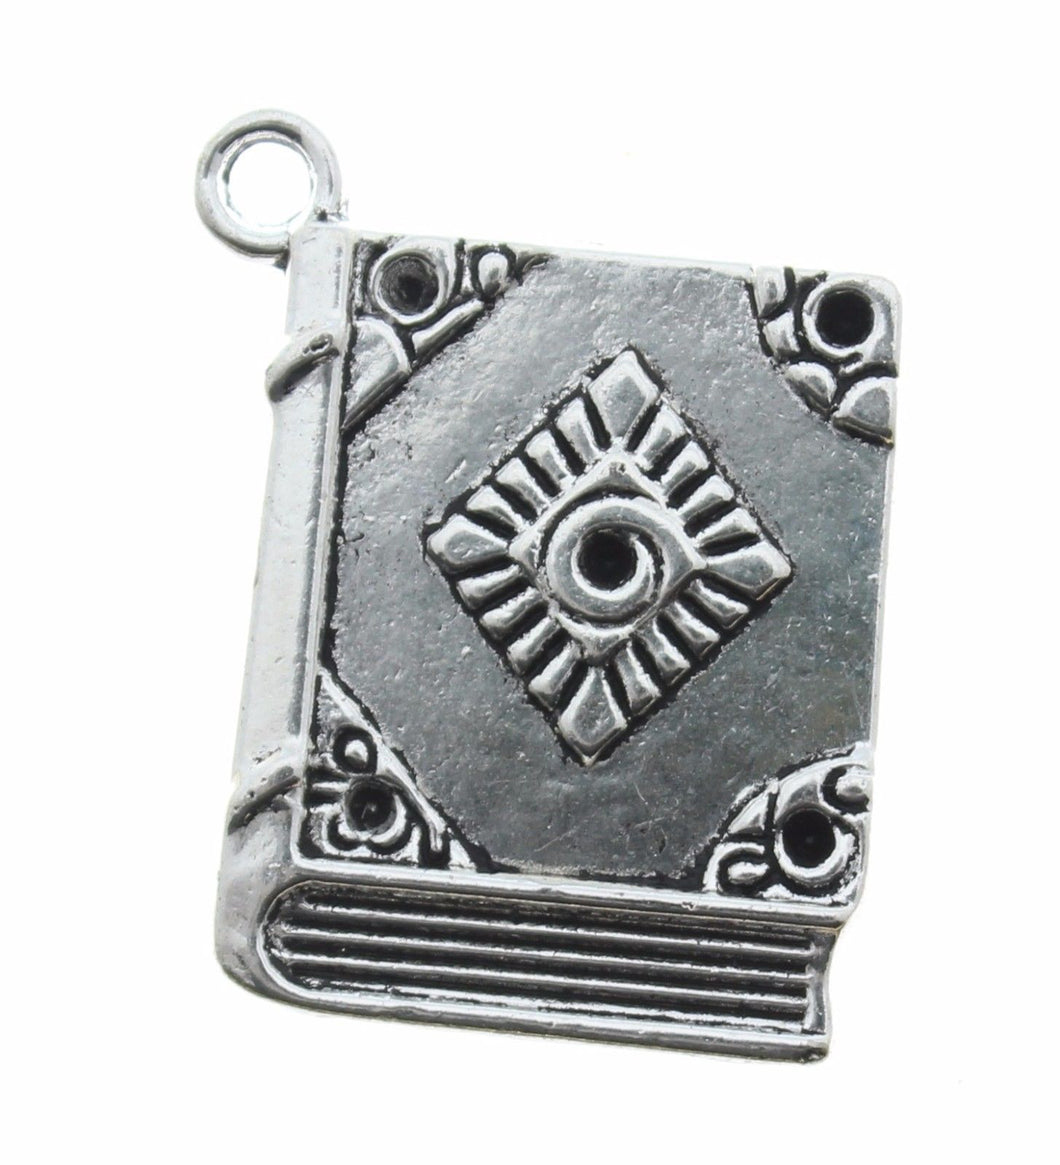 AVBeads Wicca Charms Spell Book Charms Silver 26mm x 22mm Metal Charms 10pcs